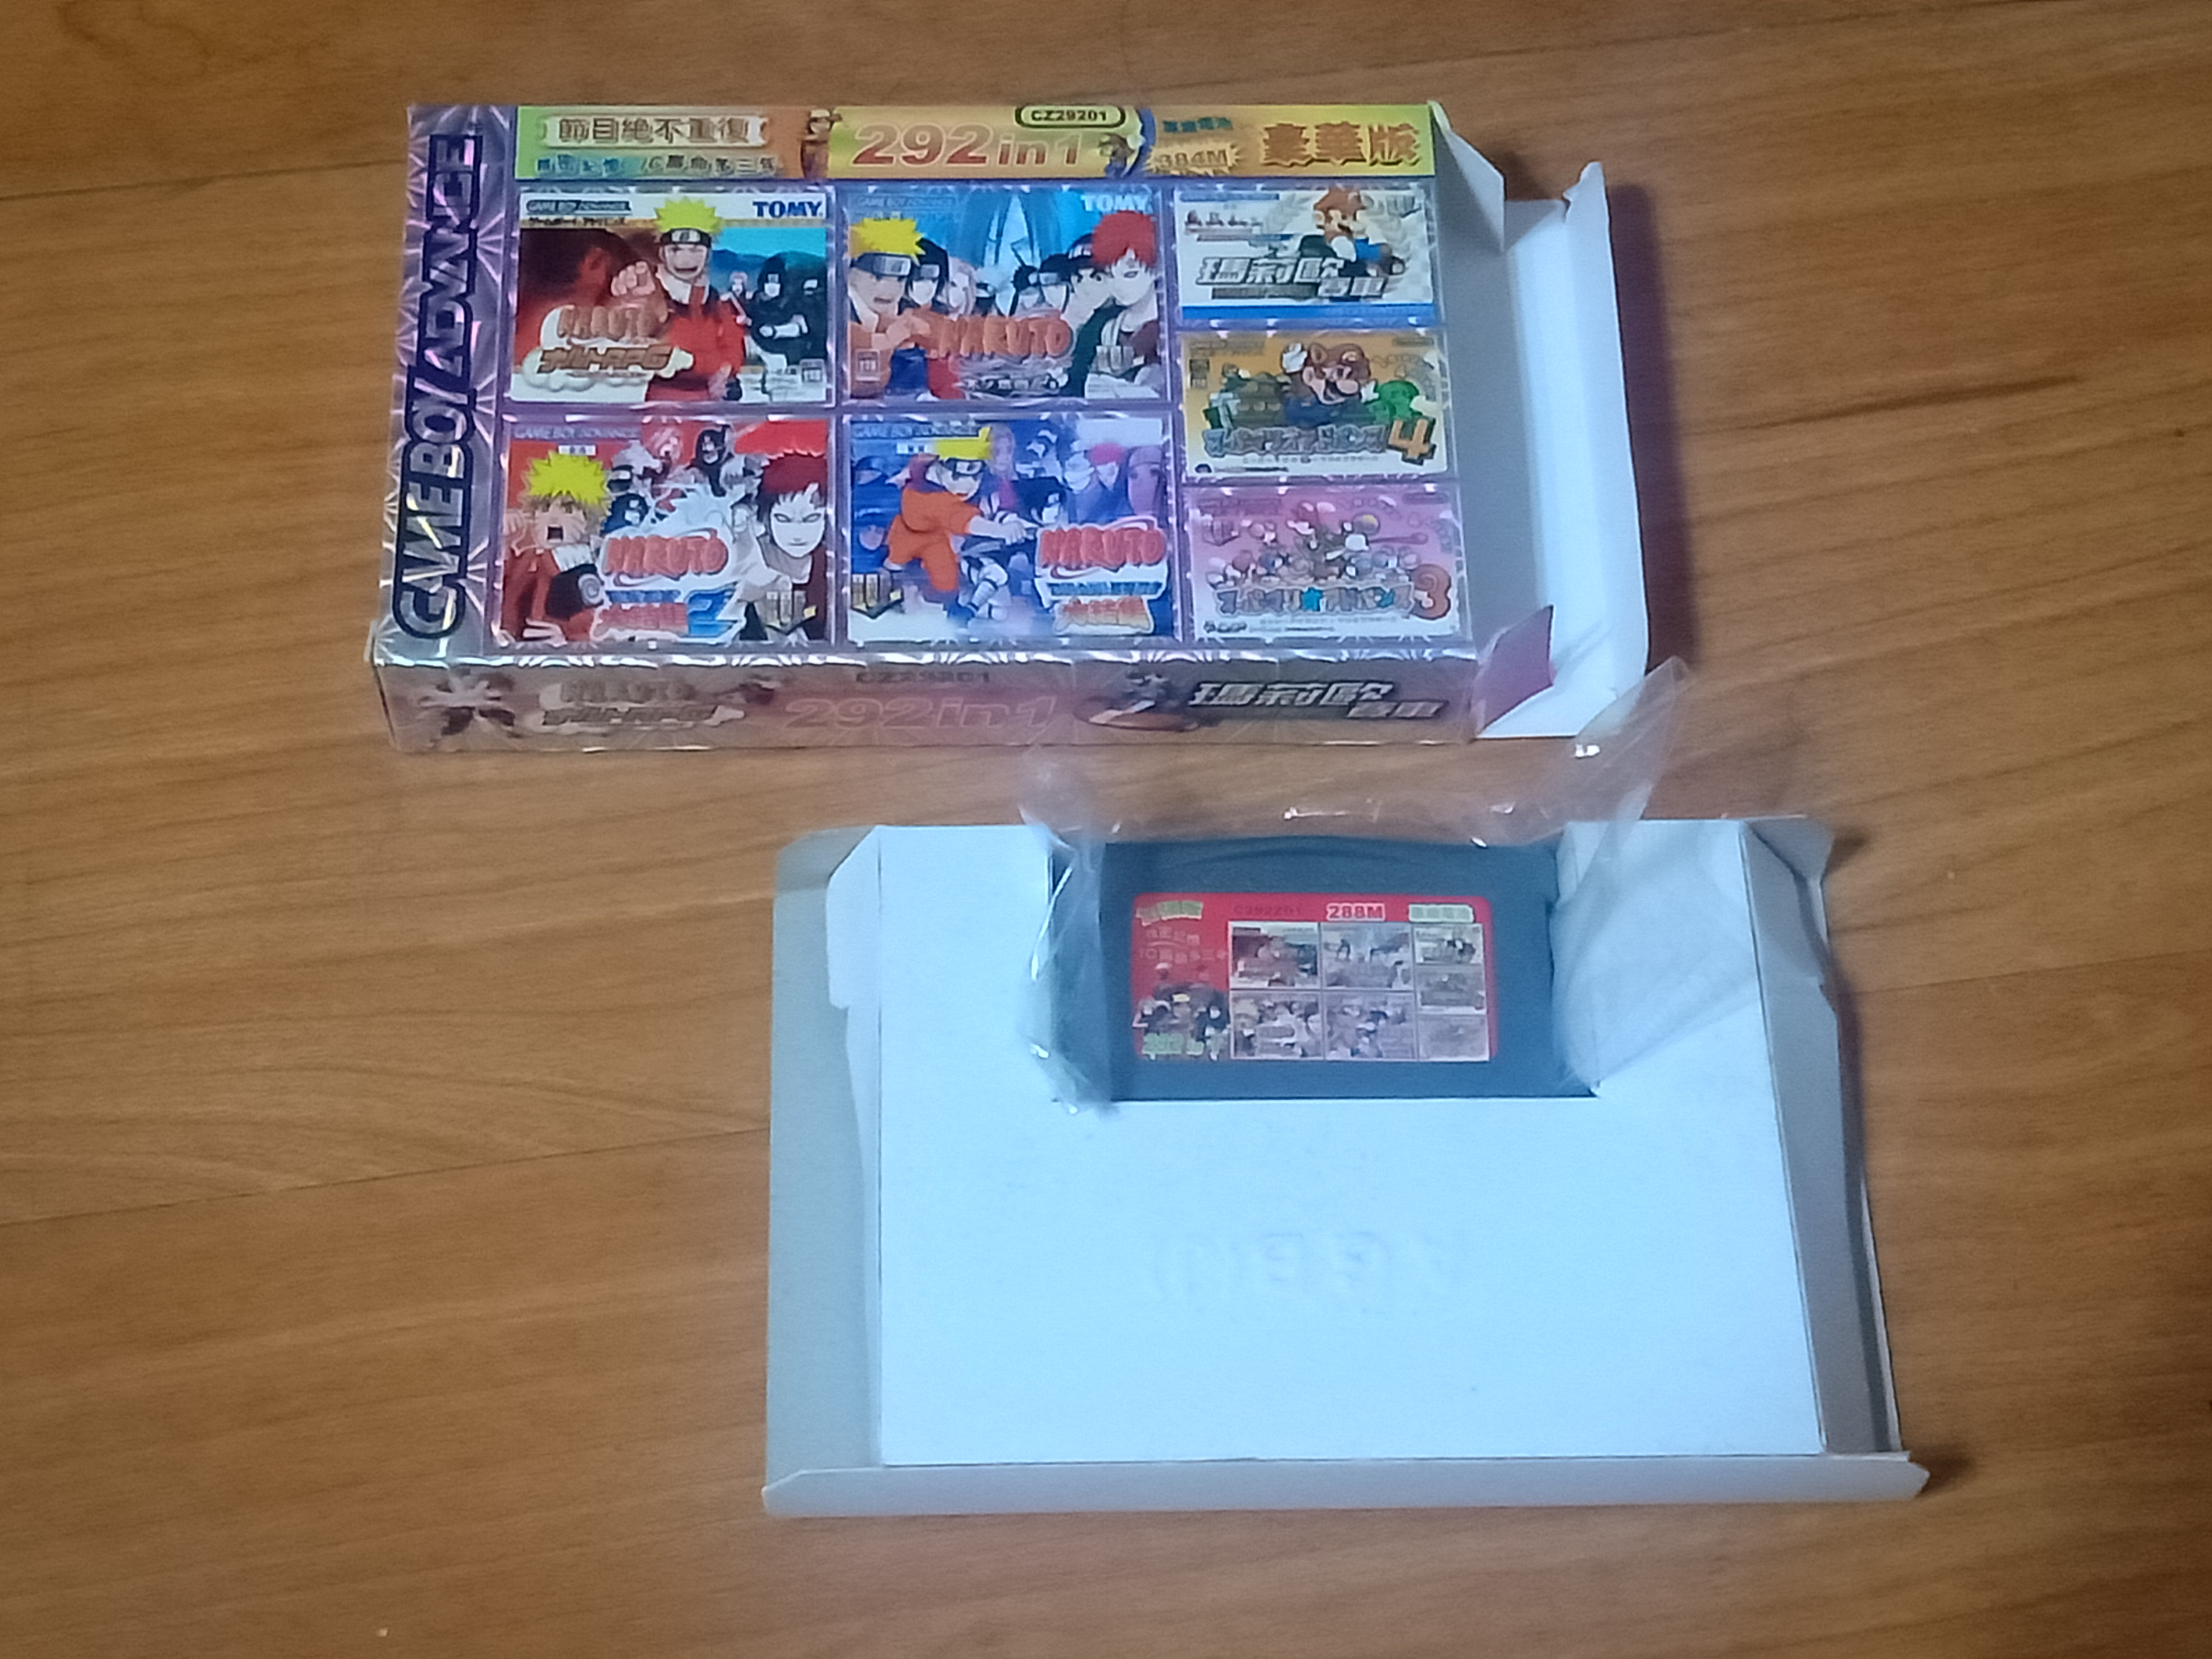 fcgamer's non- Famicom items for sale (updated 10/14/2019)